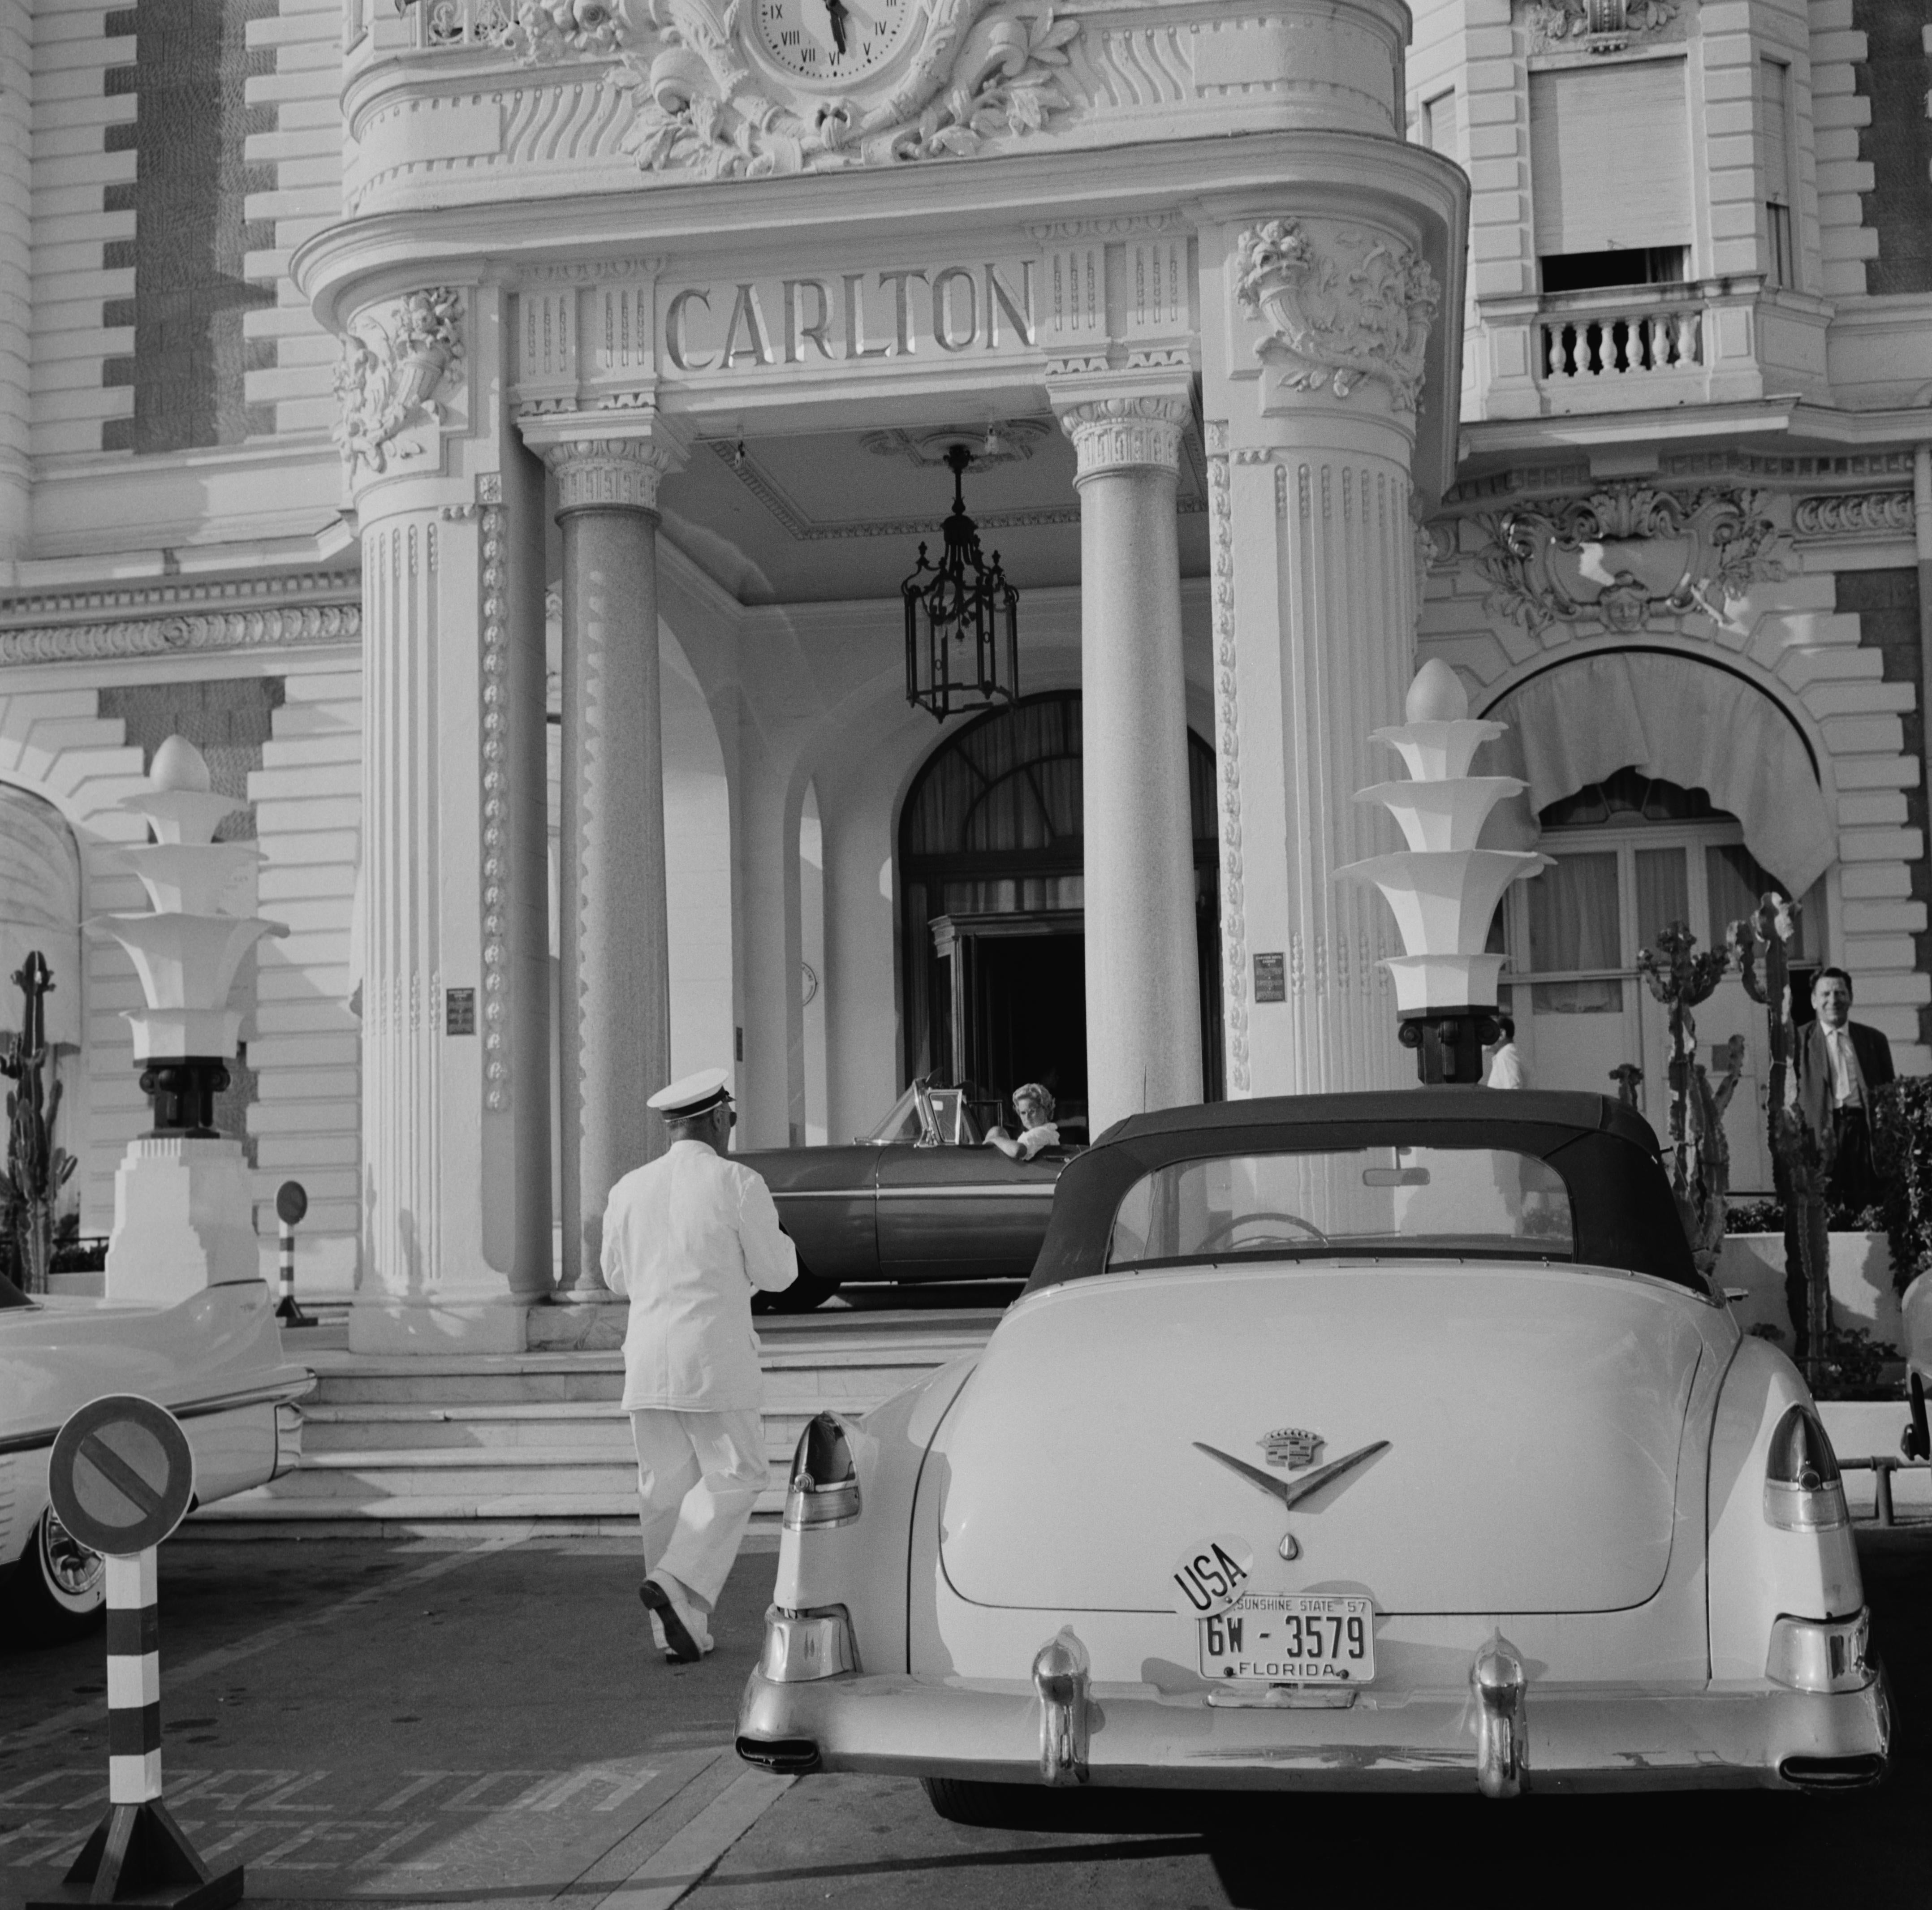 'The Carlton Hotel' 1955 Slim Aarons Limited Estate Edition

A Cadillac with Florida plates parked outside the Carlton Hotel, Cannes, France, circa 1955. 

Silver Gelatin Fibre Print
Produced from the original transparency
Certificate of